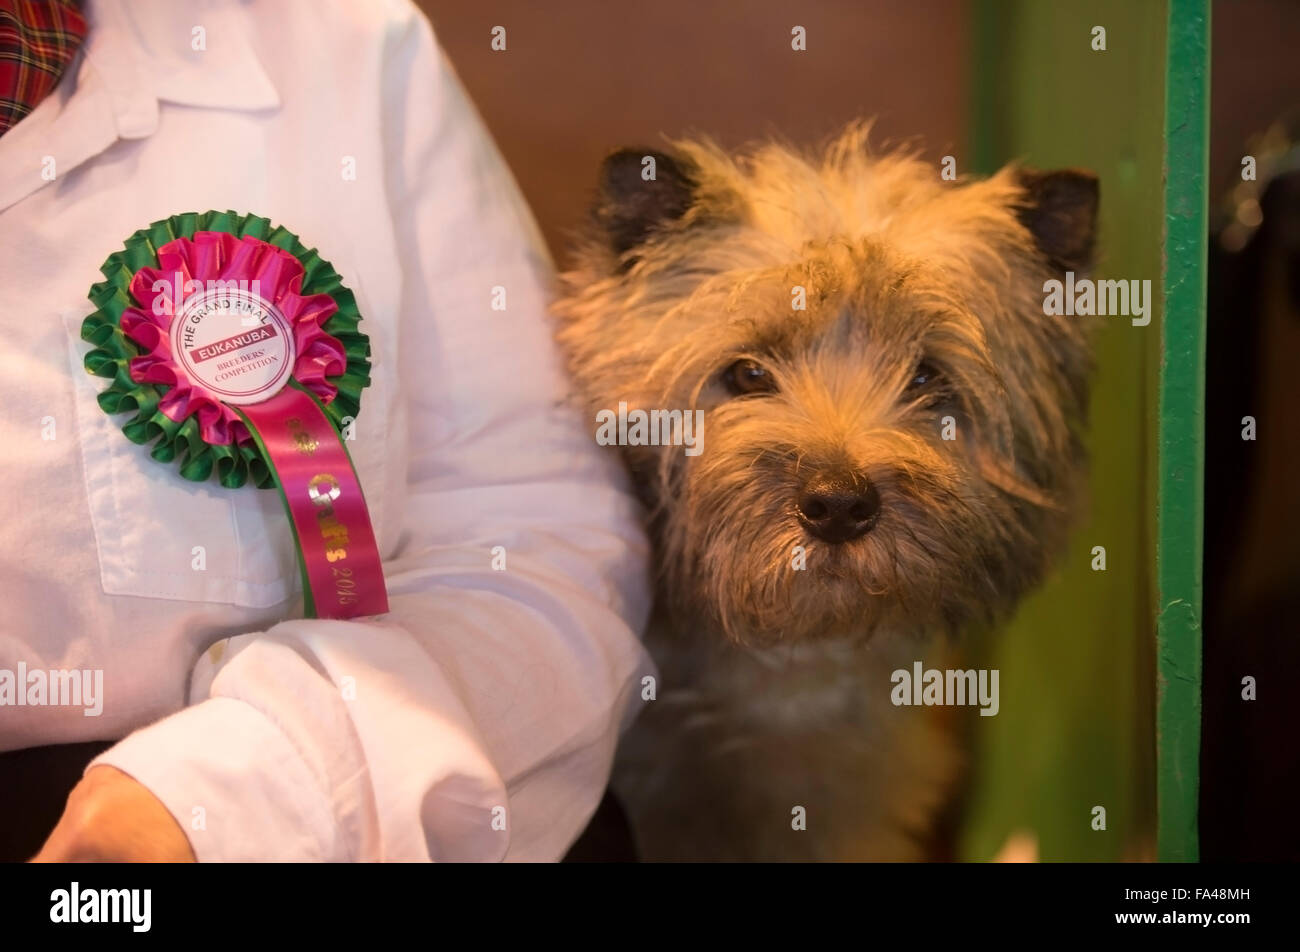 Crufts dog show at the NEC, Birmingham - a Cairn Terrier entered in the Breeders Cup section 2015 UK Stock Photo